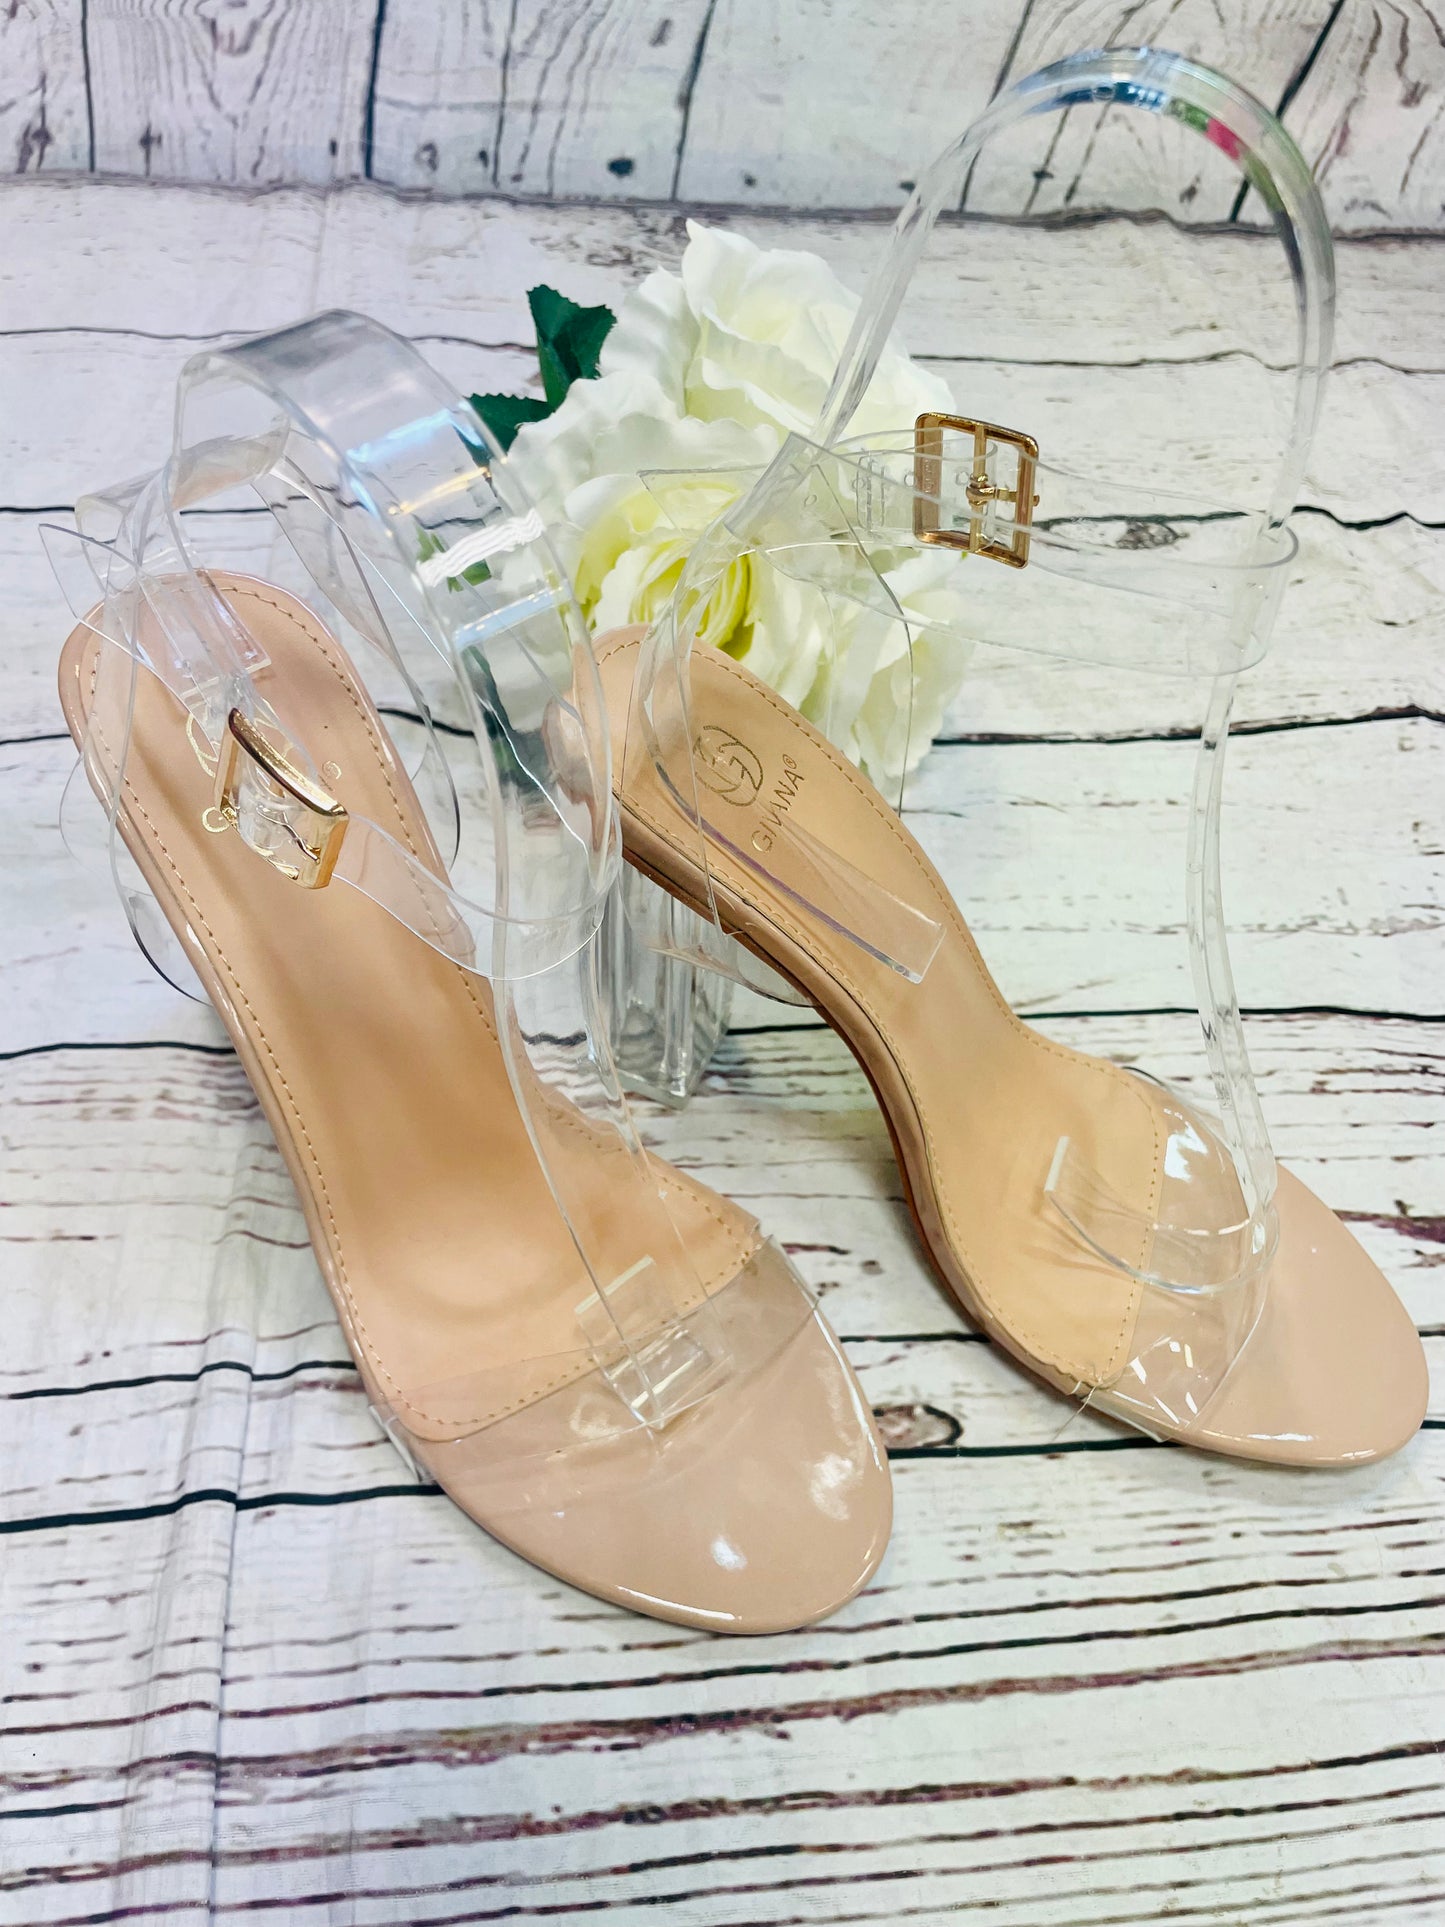 CLEAR STRAPPY HIGH HEEL SANDALS ( JRX1913 ) sizes 3 to 8